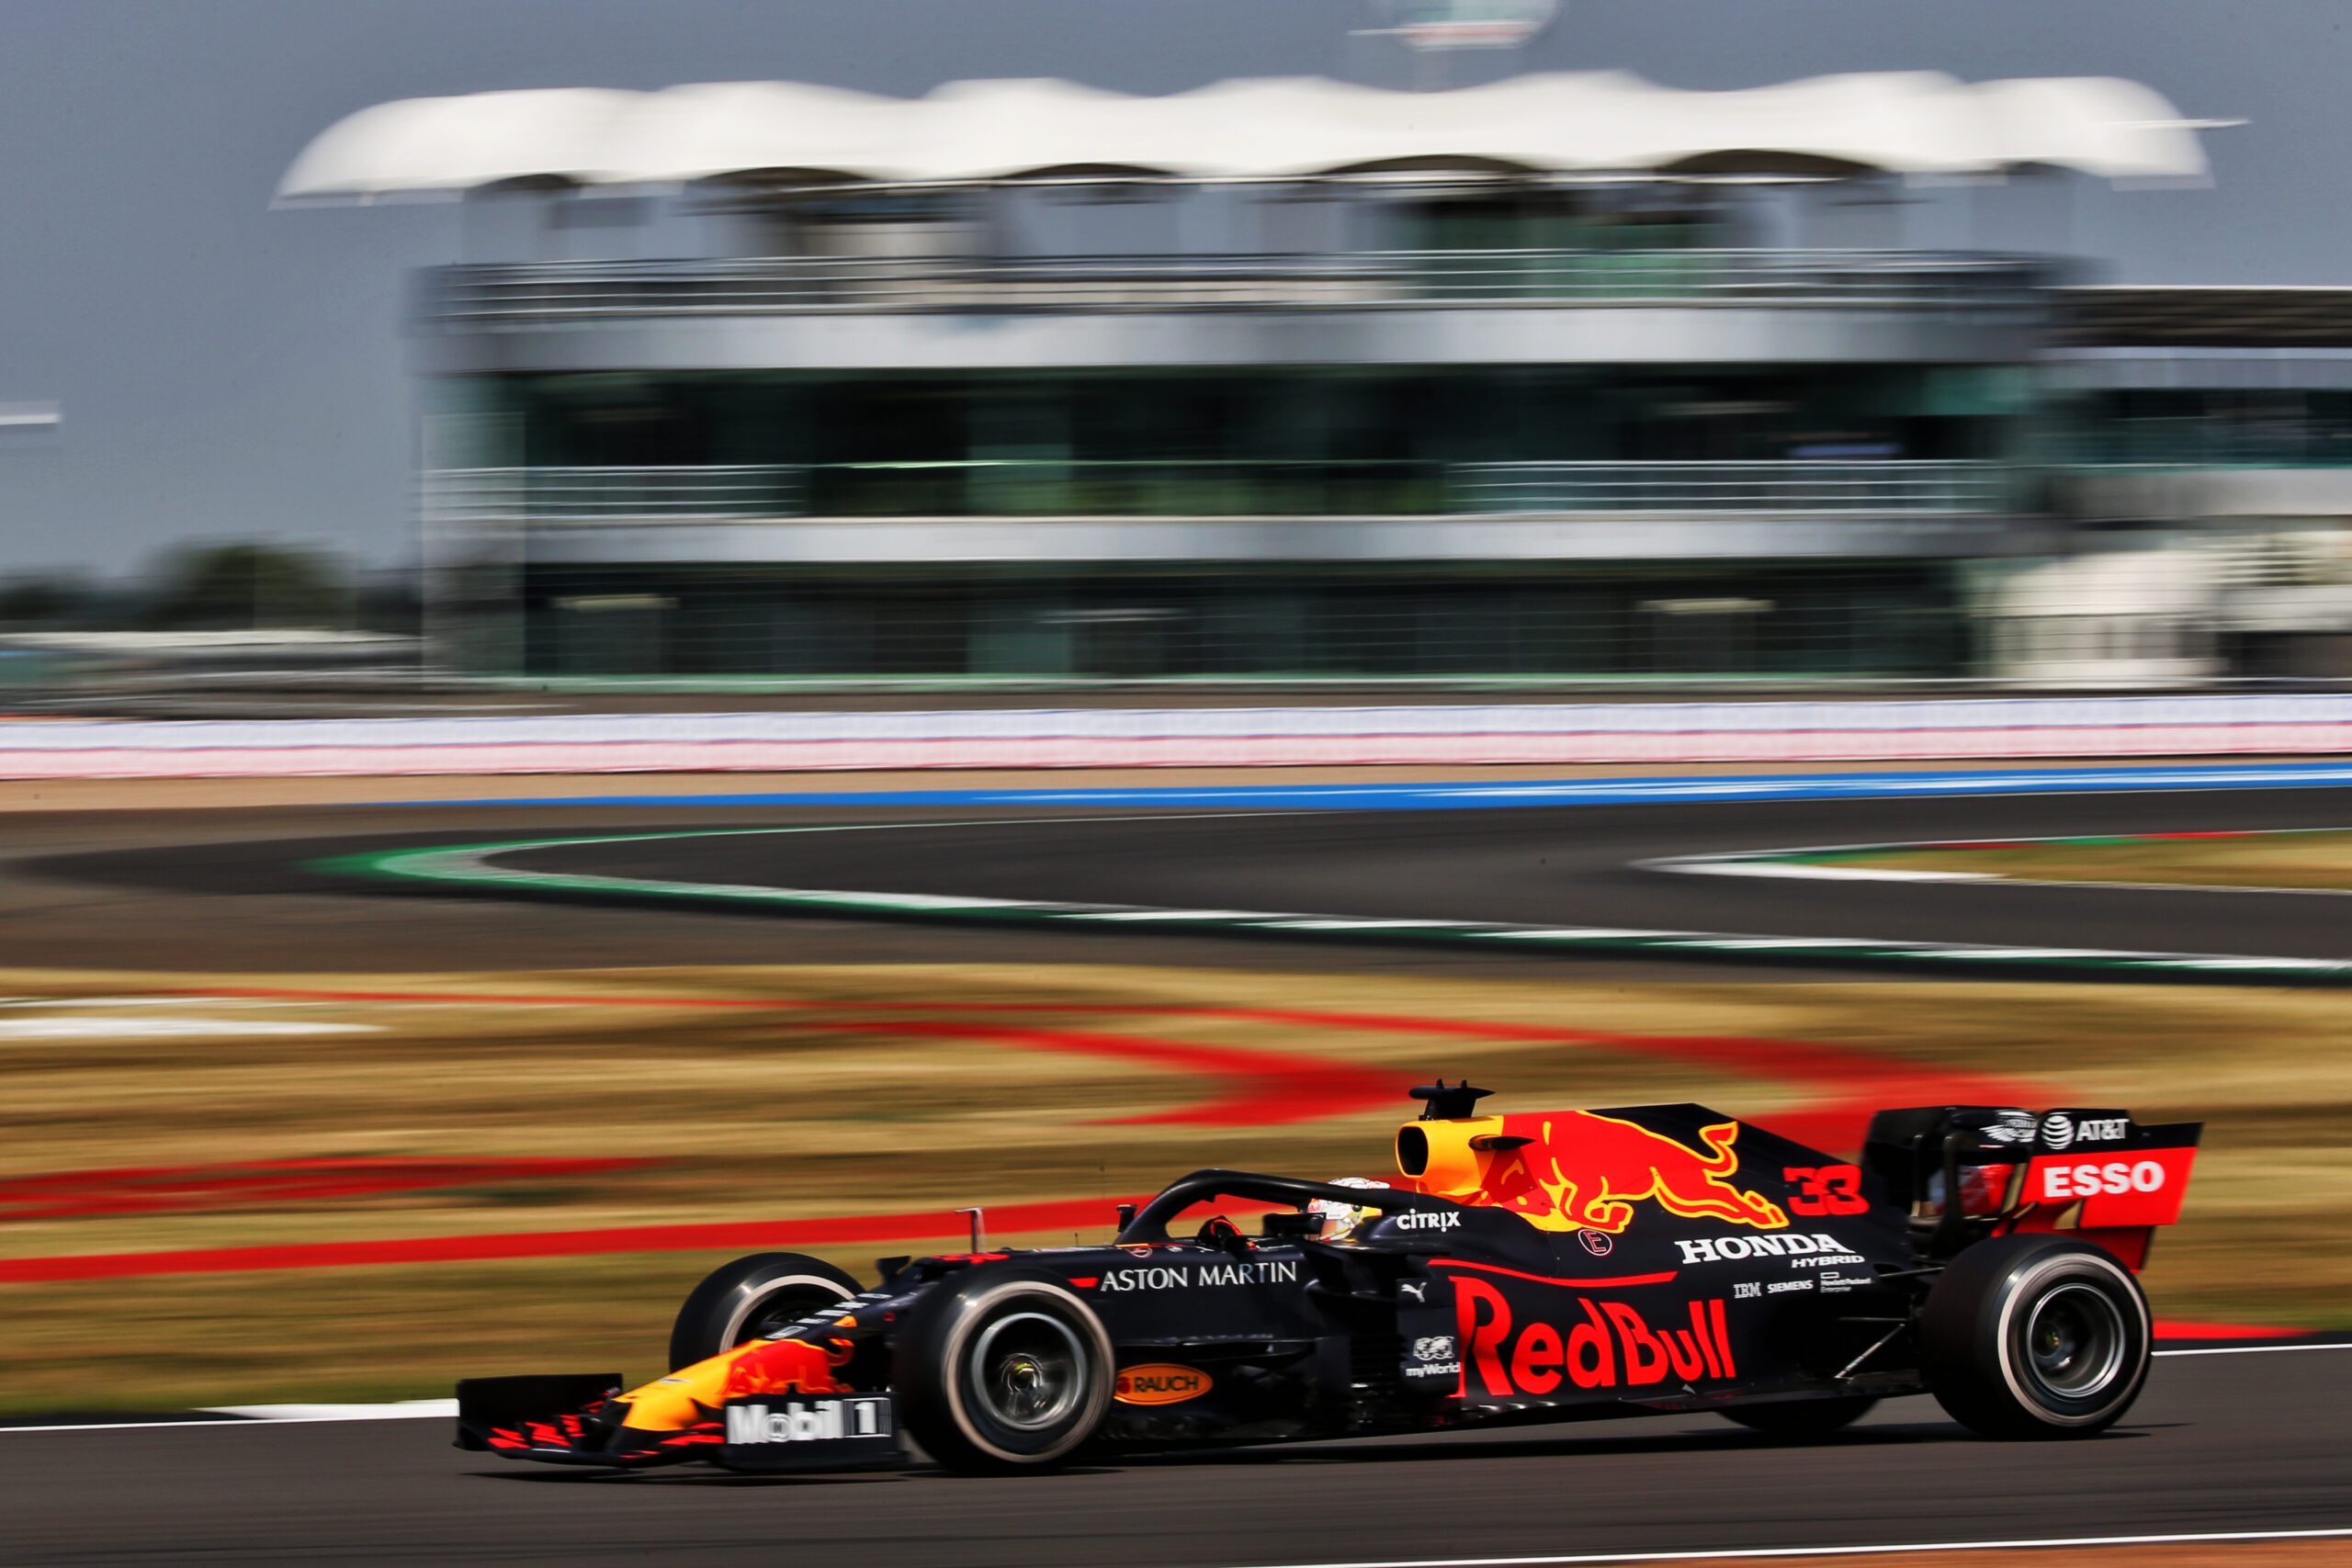 SILVERSTONE,ENGLAND,09.AUG.20 - MOTORSPORTS, FORMULA 1 - 70th Anniversary Grand Prix, Silverstone Circuit. Image shows Max Verstappen (NED/ Red Bull Racing).